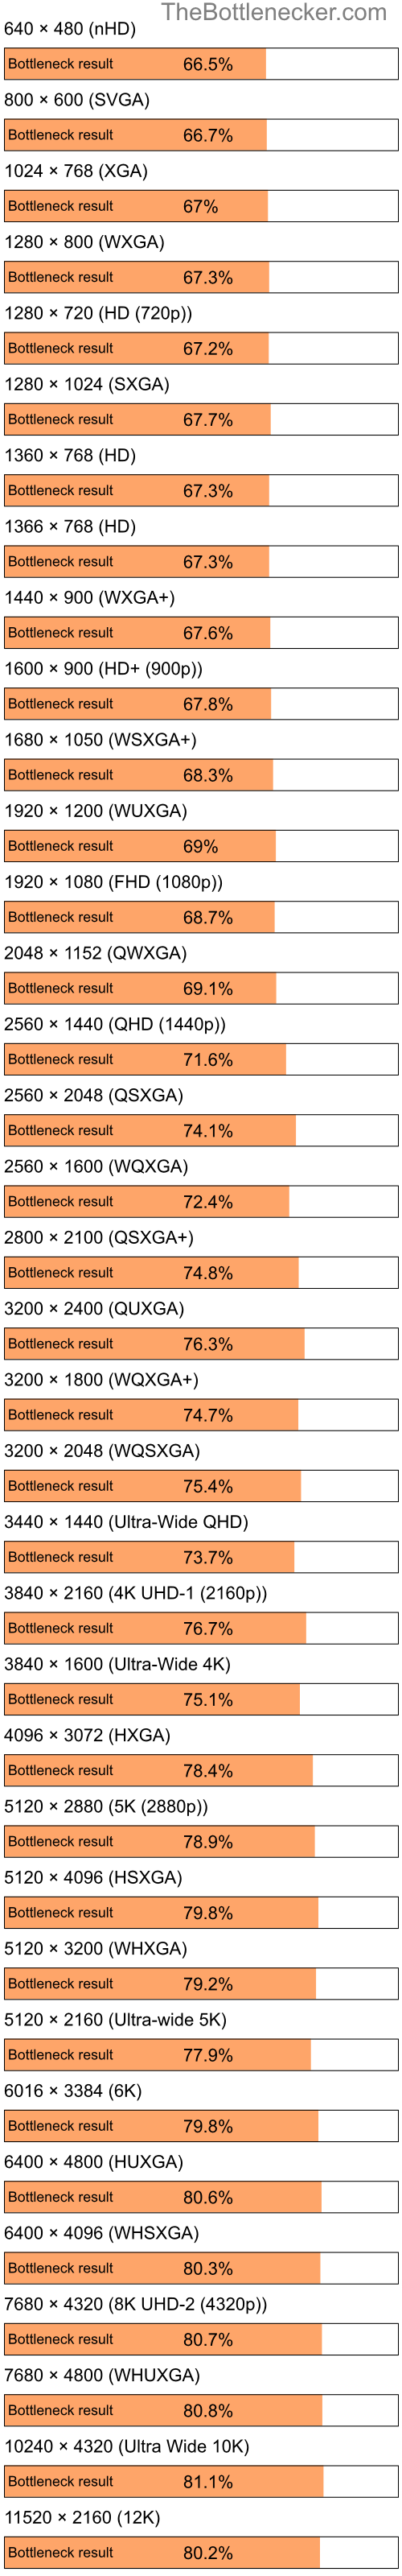 Bottleneck results by resolution for Intel Pentium 4 and AMD Mobility Radeon X700 in7 Days to Die